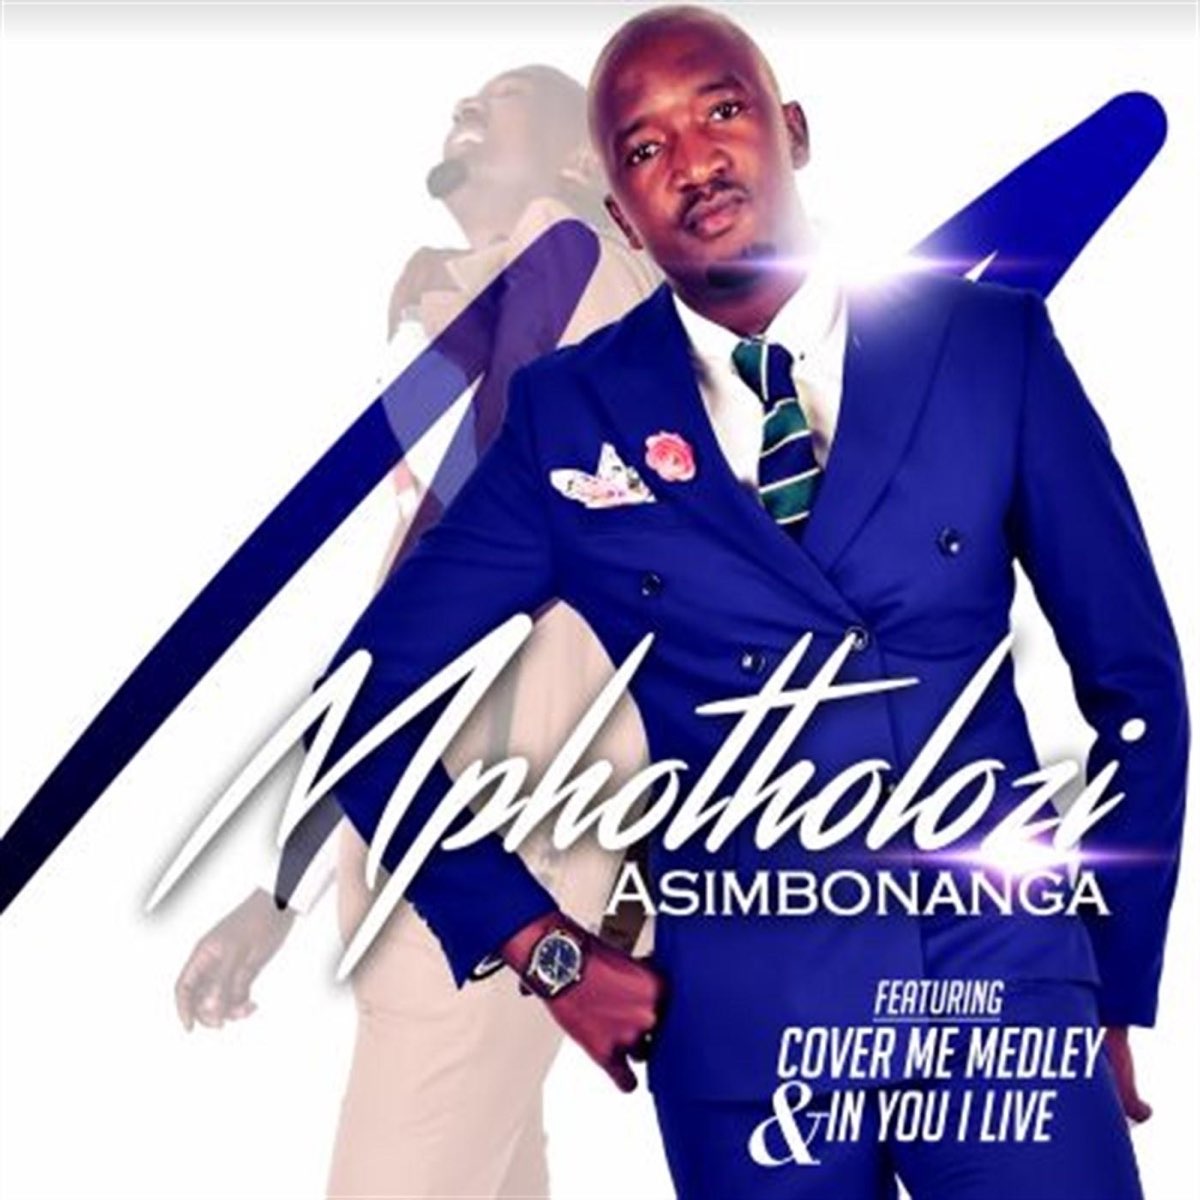 Asimbonanga Featuring Cover Me Medley & in You I Live by Mphotholozi on  Apple Music